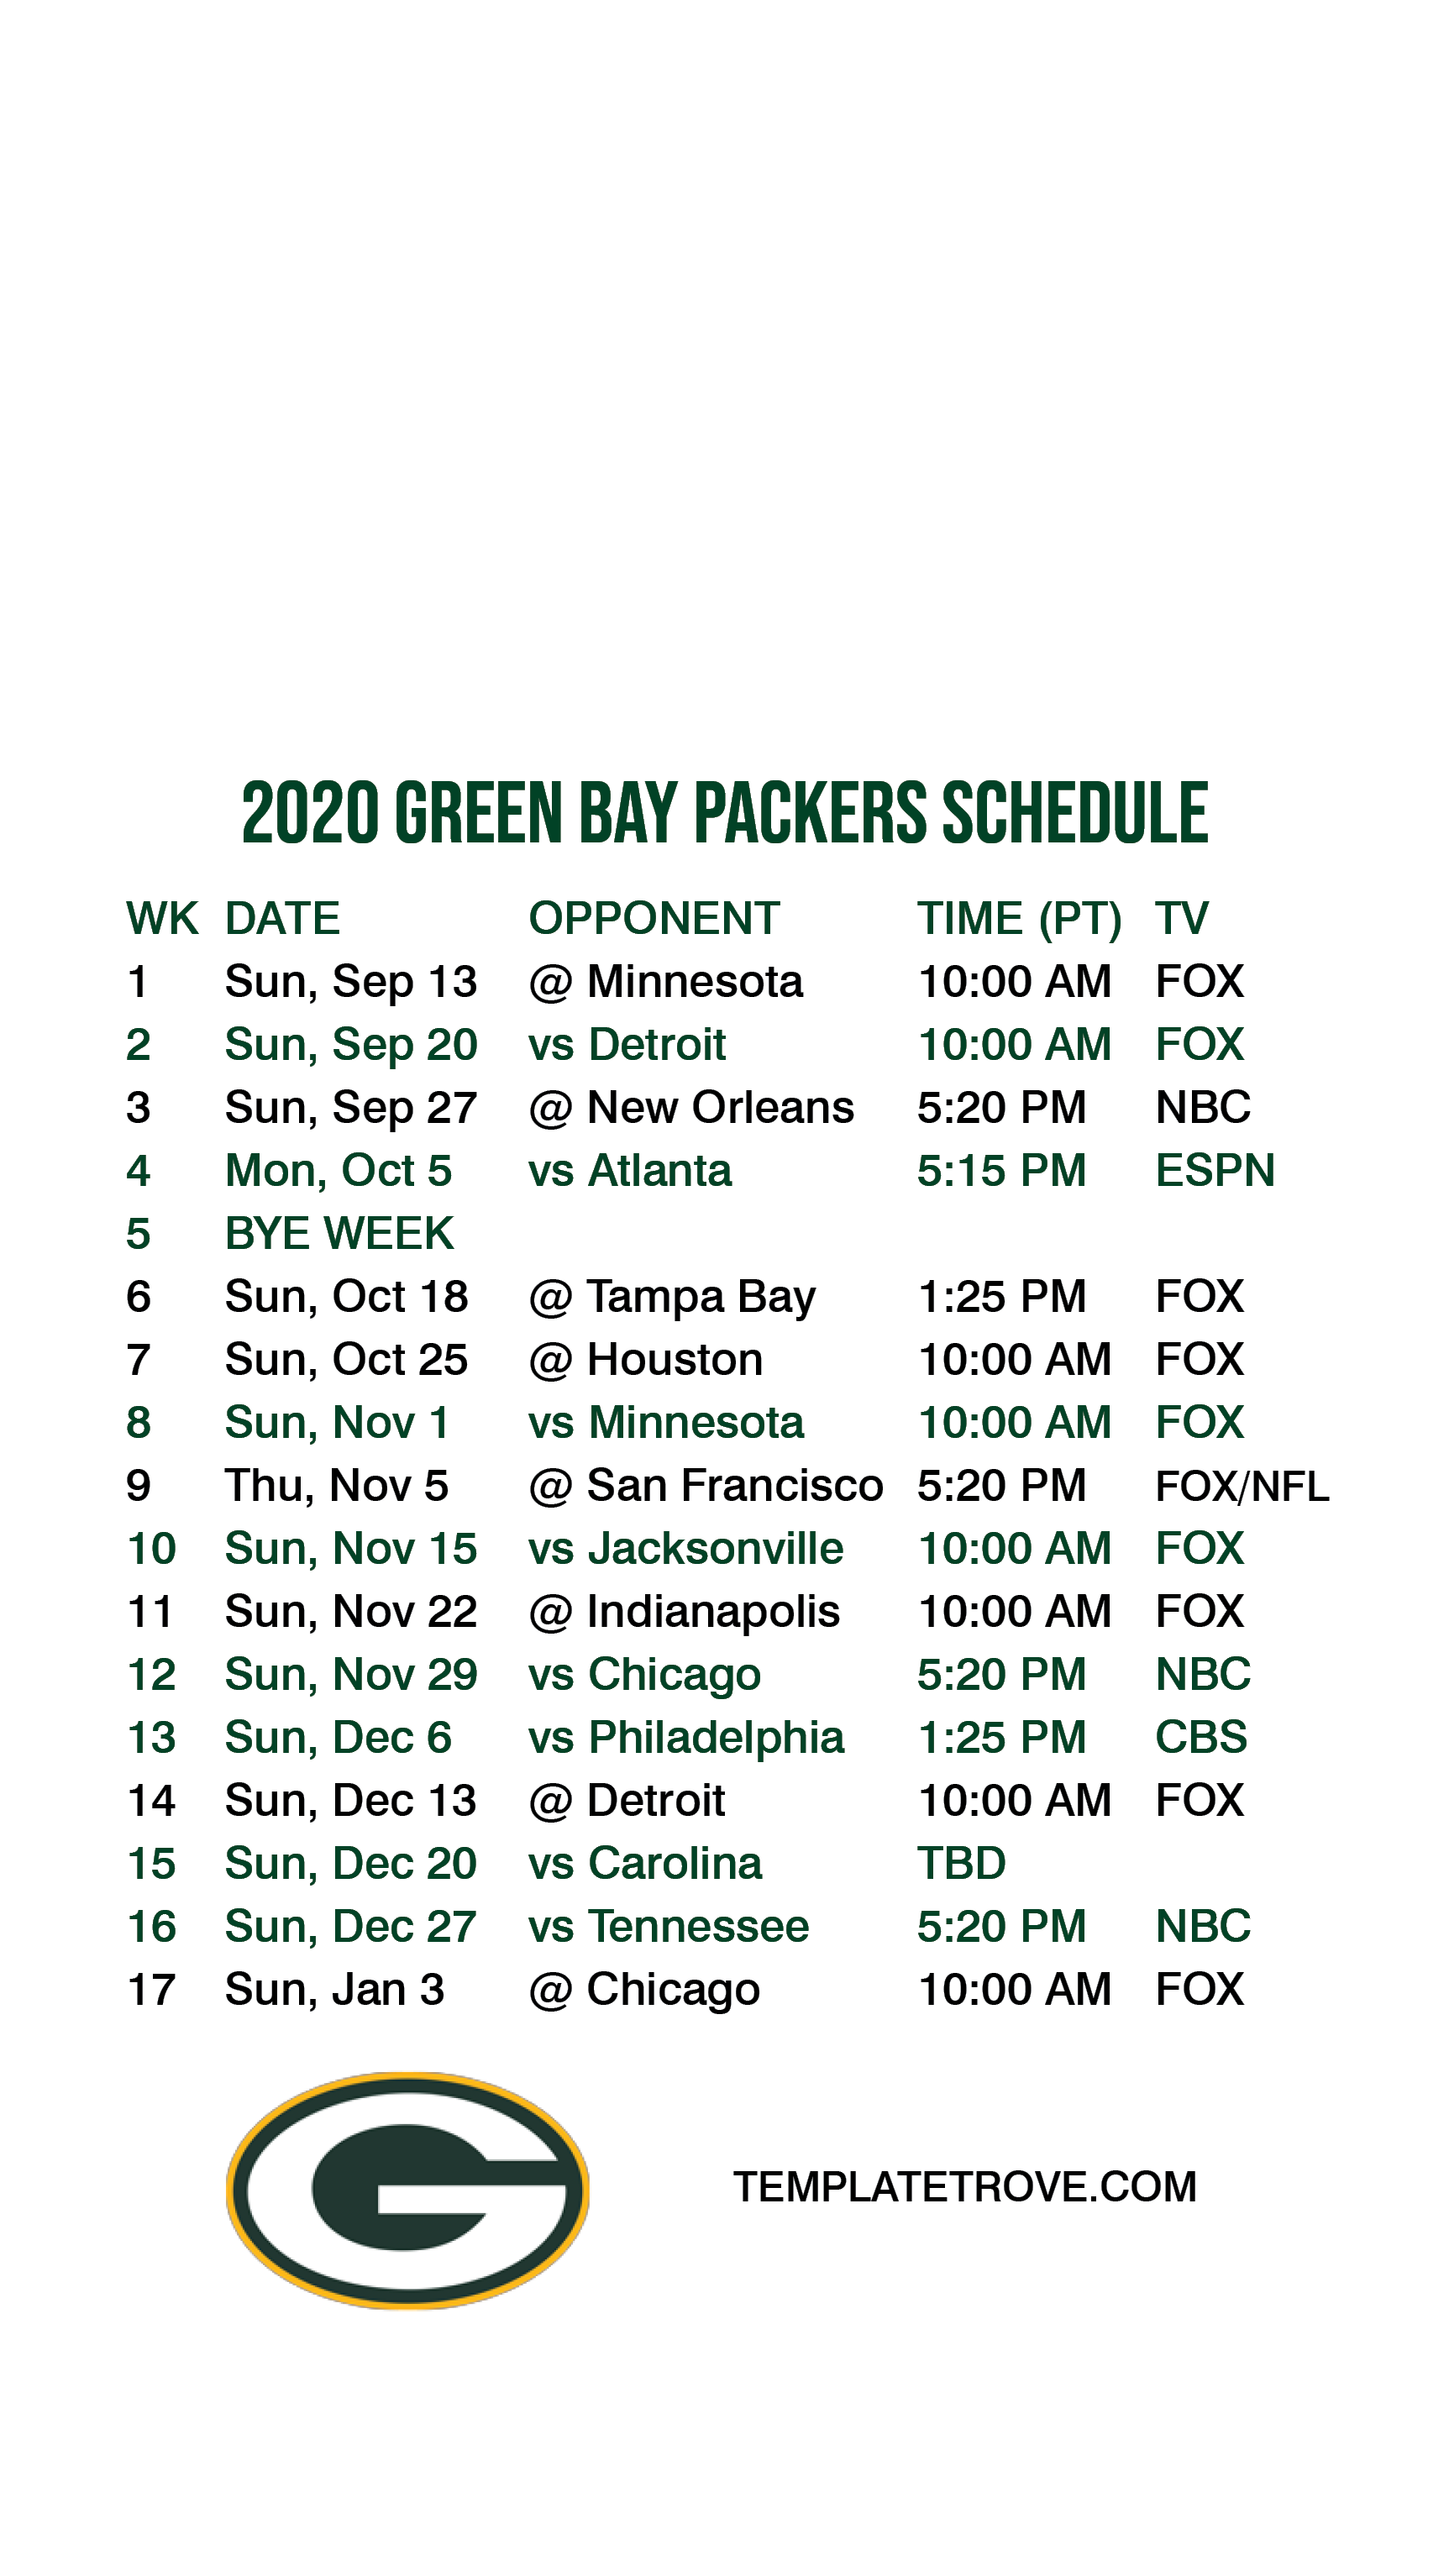 2020-2021 Green Bay Packers Lock Screen Schedule for iPhone 6-7-8 Plus